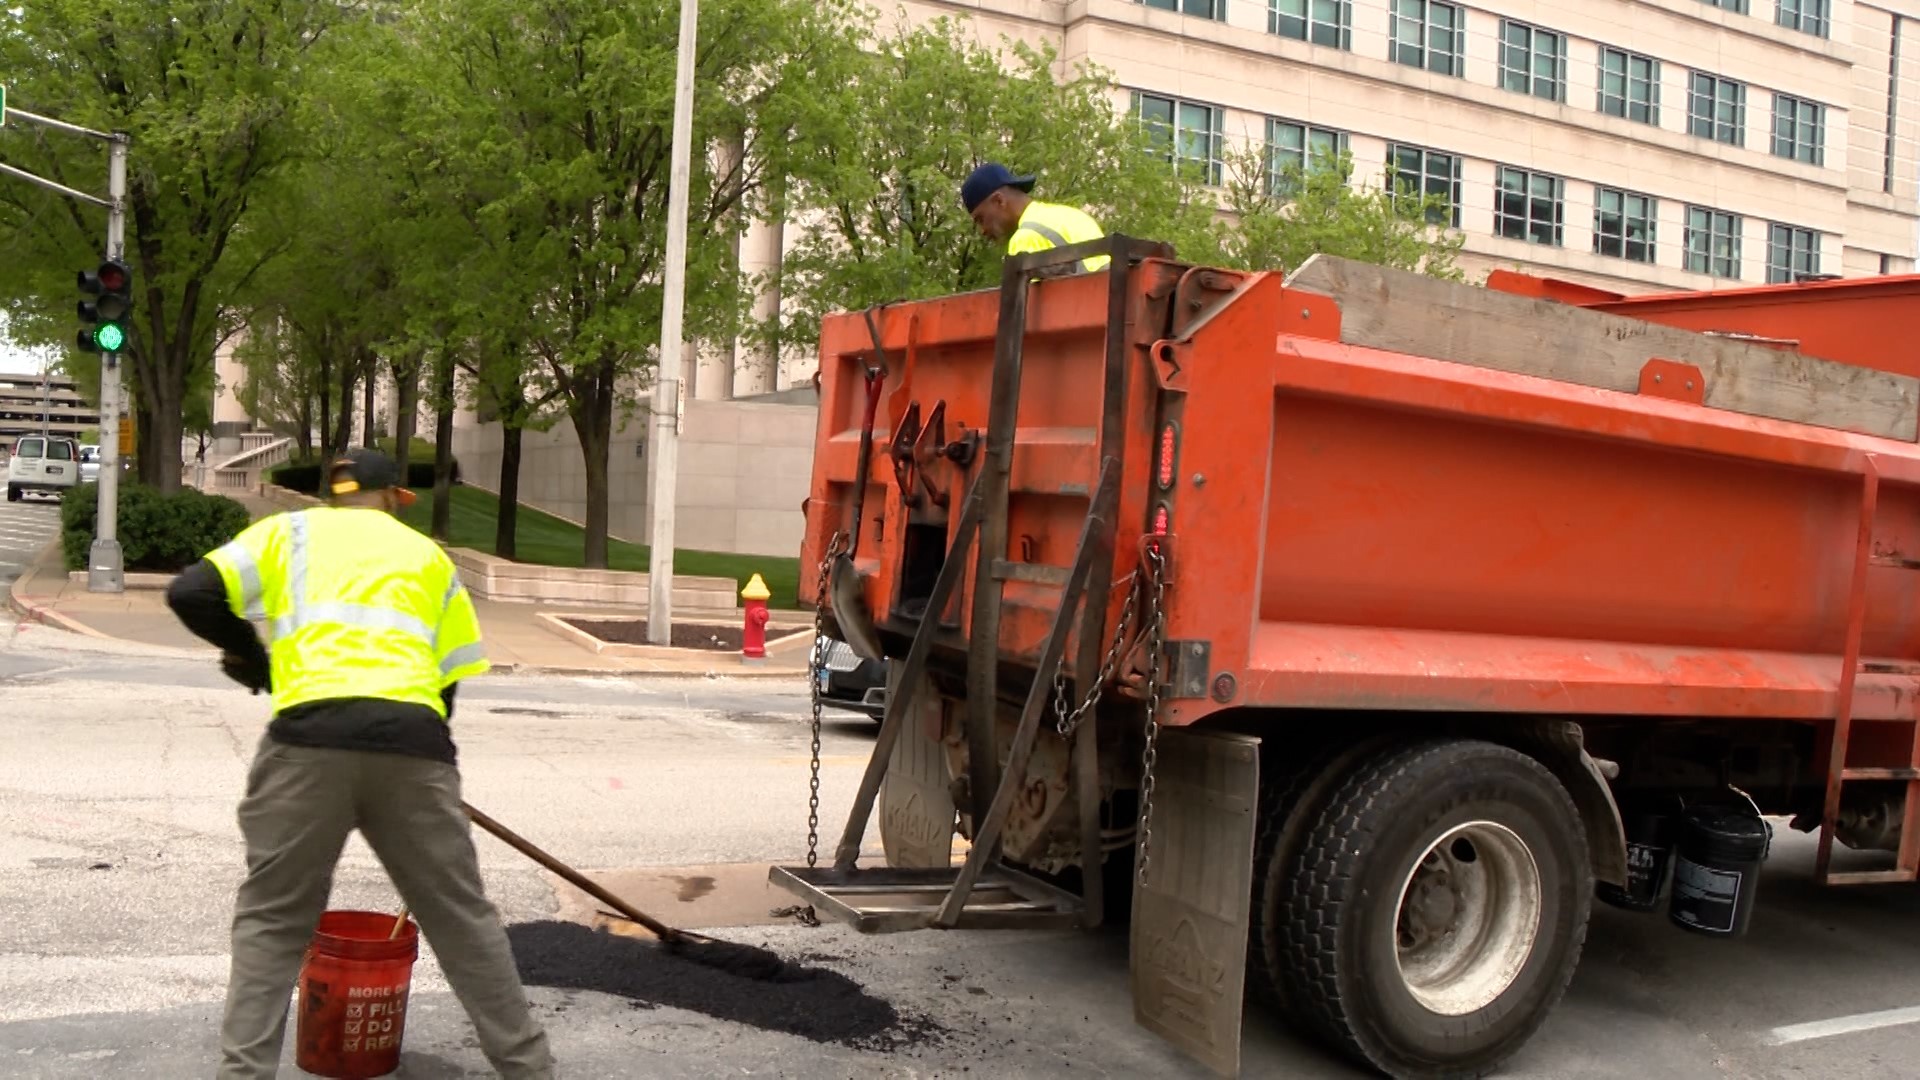 Kent Flake, the commissioner of streets for St. Louis, said his six, two-man crews usually repair about 120 potholes each day.